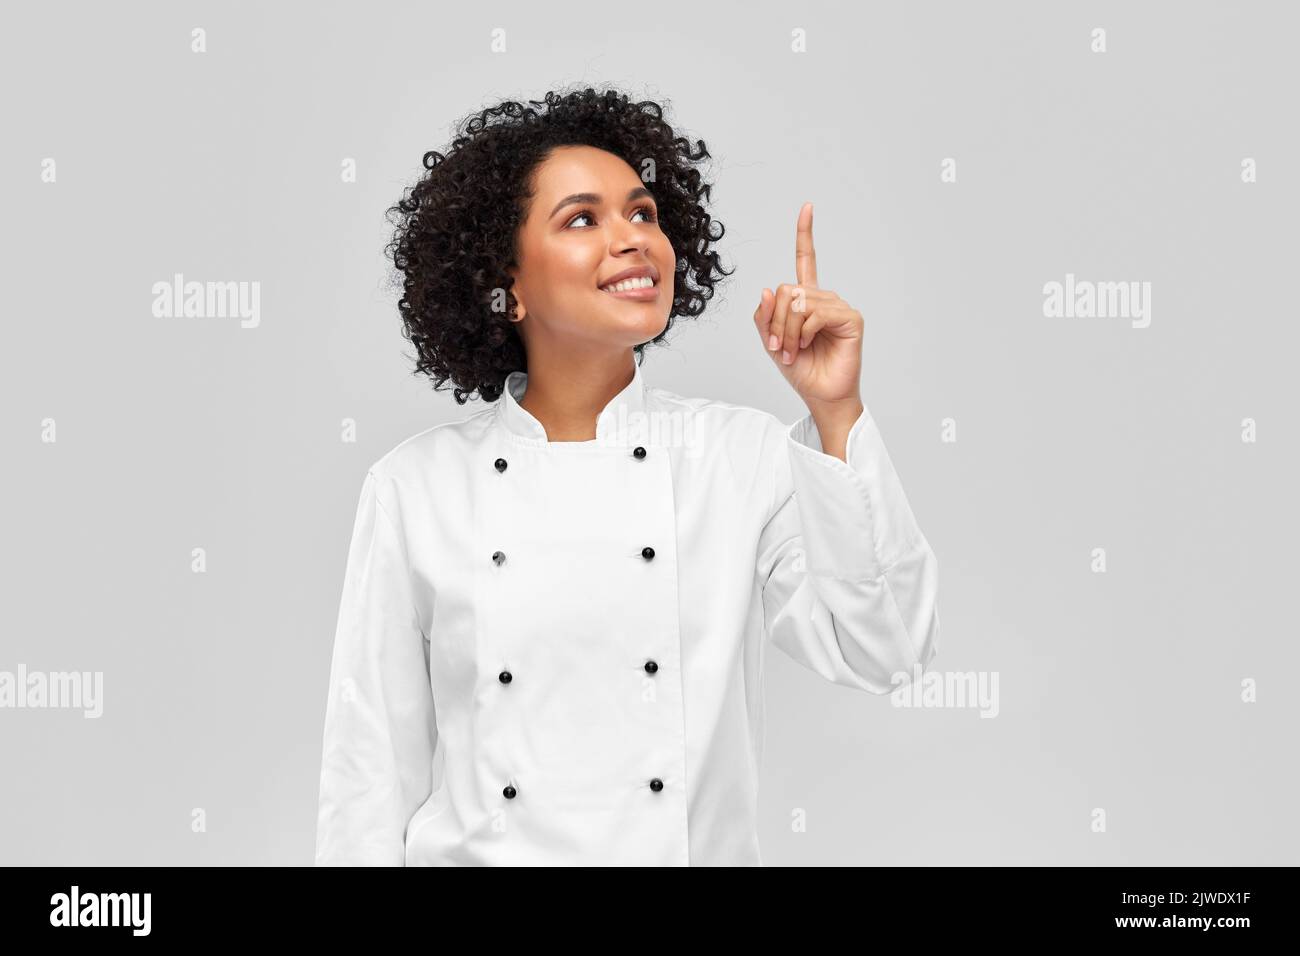 smiling female chef in jacket pointing finger up Stock Photo